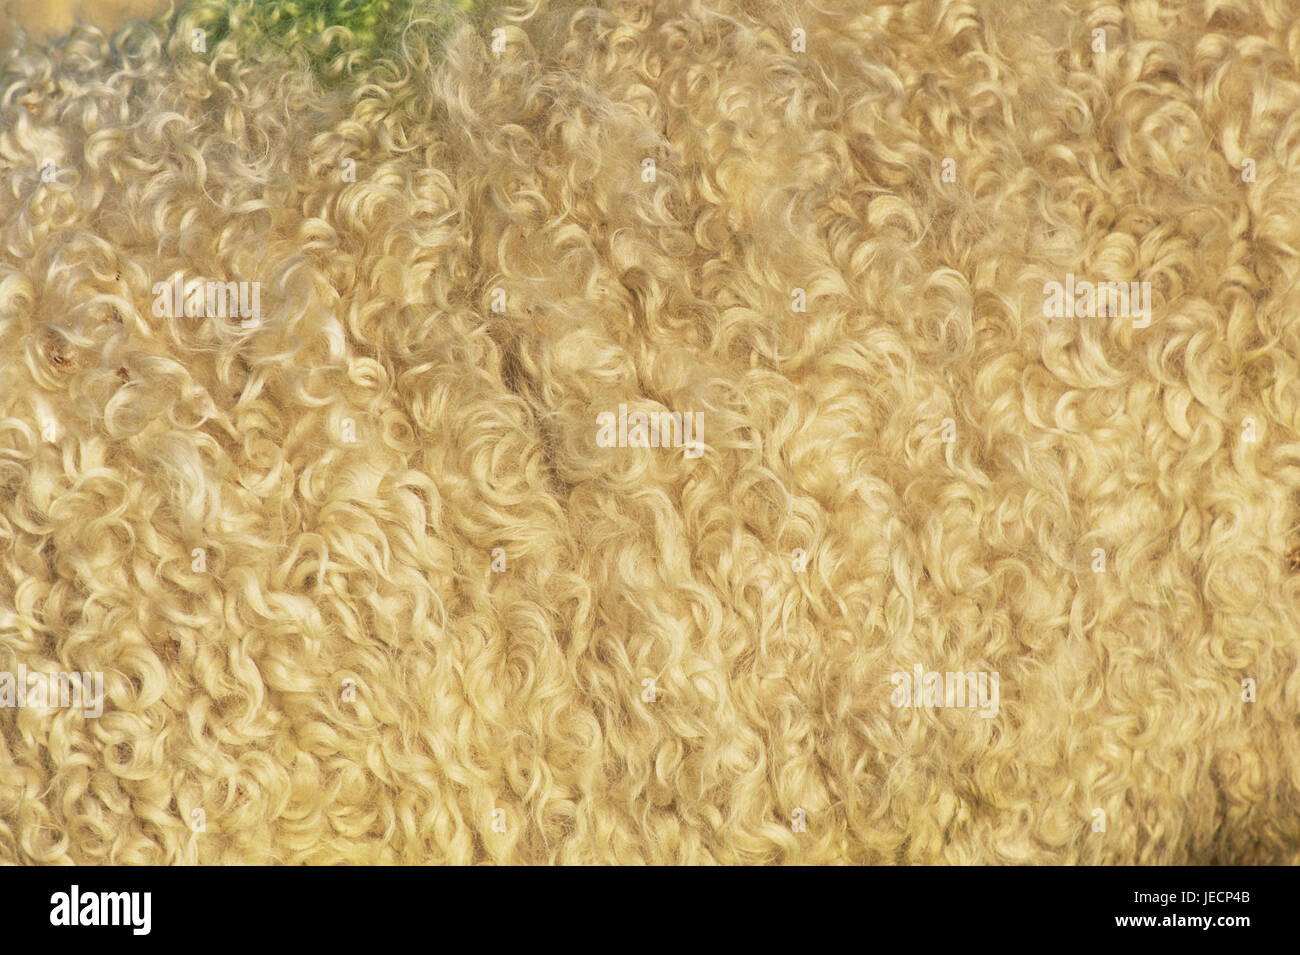 Sheep's wool, close up, agriculture, cattle economy, animal, mammal, benefit animal, cattle breeding, stockbreeding, Schafrasse, Ovis, sheep, wool, fur, natural product, background, copy space, Stock Photo